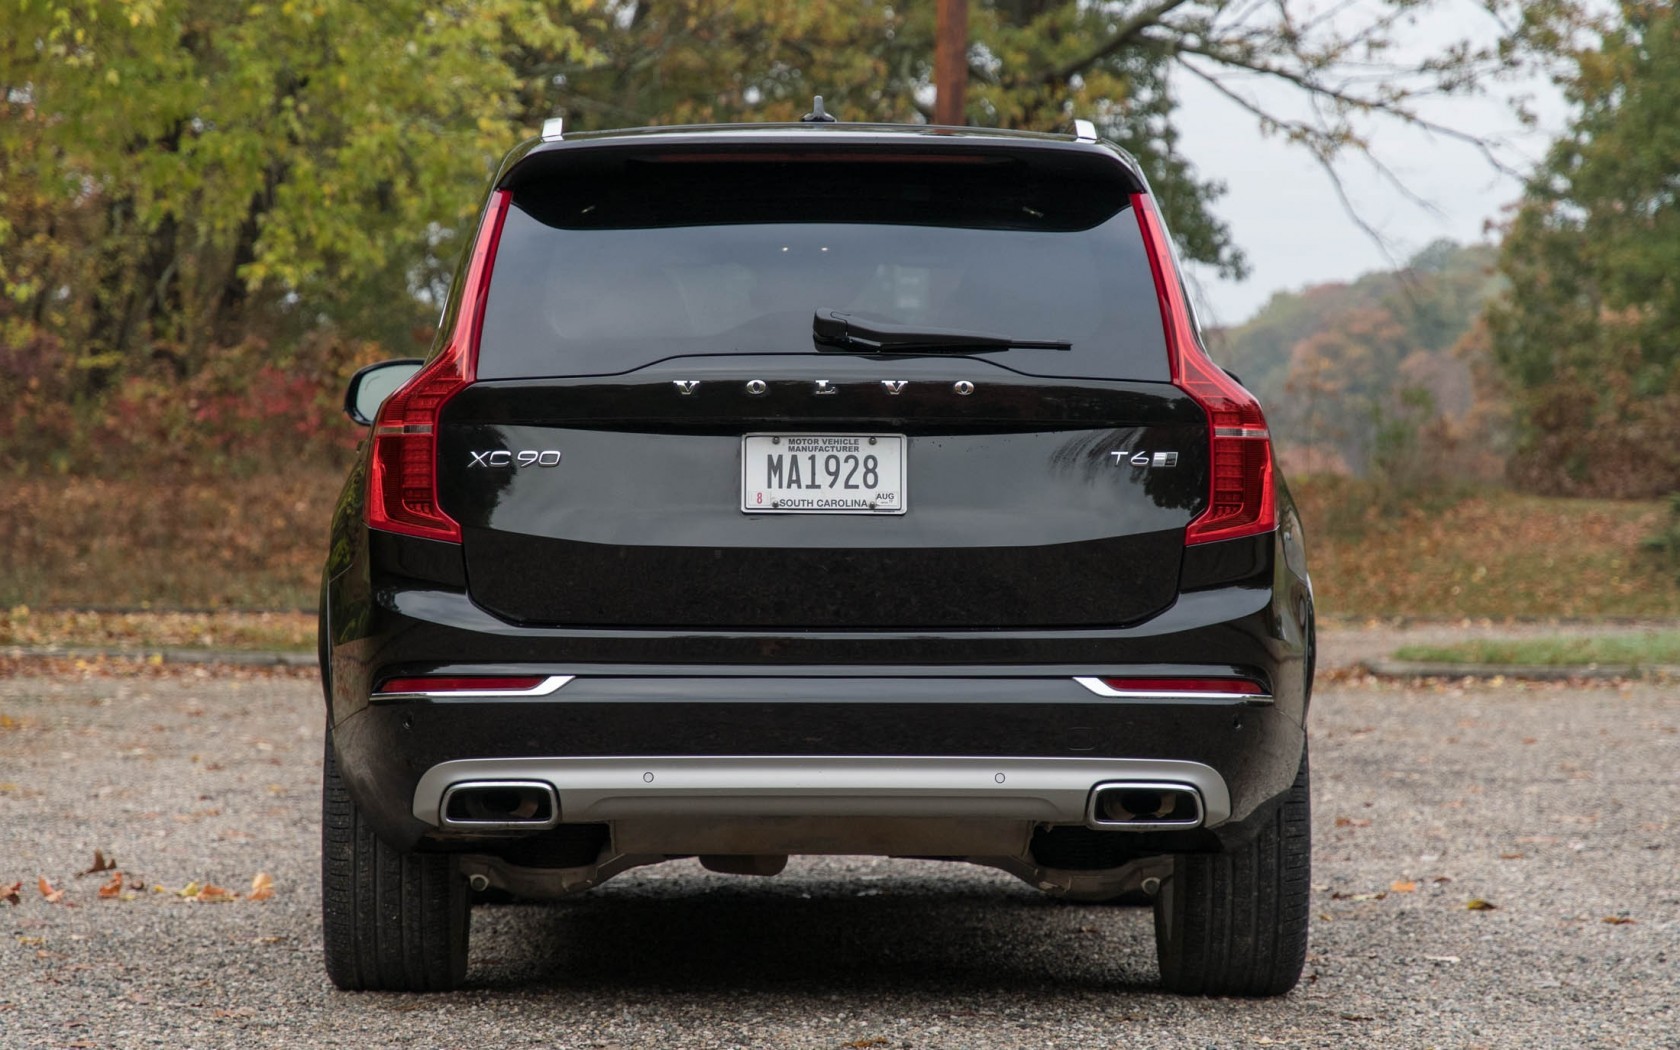 Volvo Cx90, Suv Cars, Back View - Volvo Xc90 T8 Excellence 2018 - HD Wallpaper 